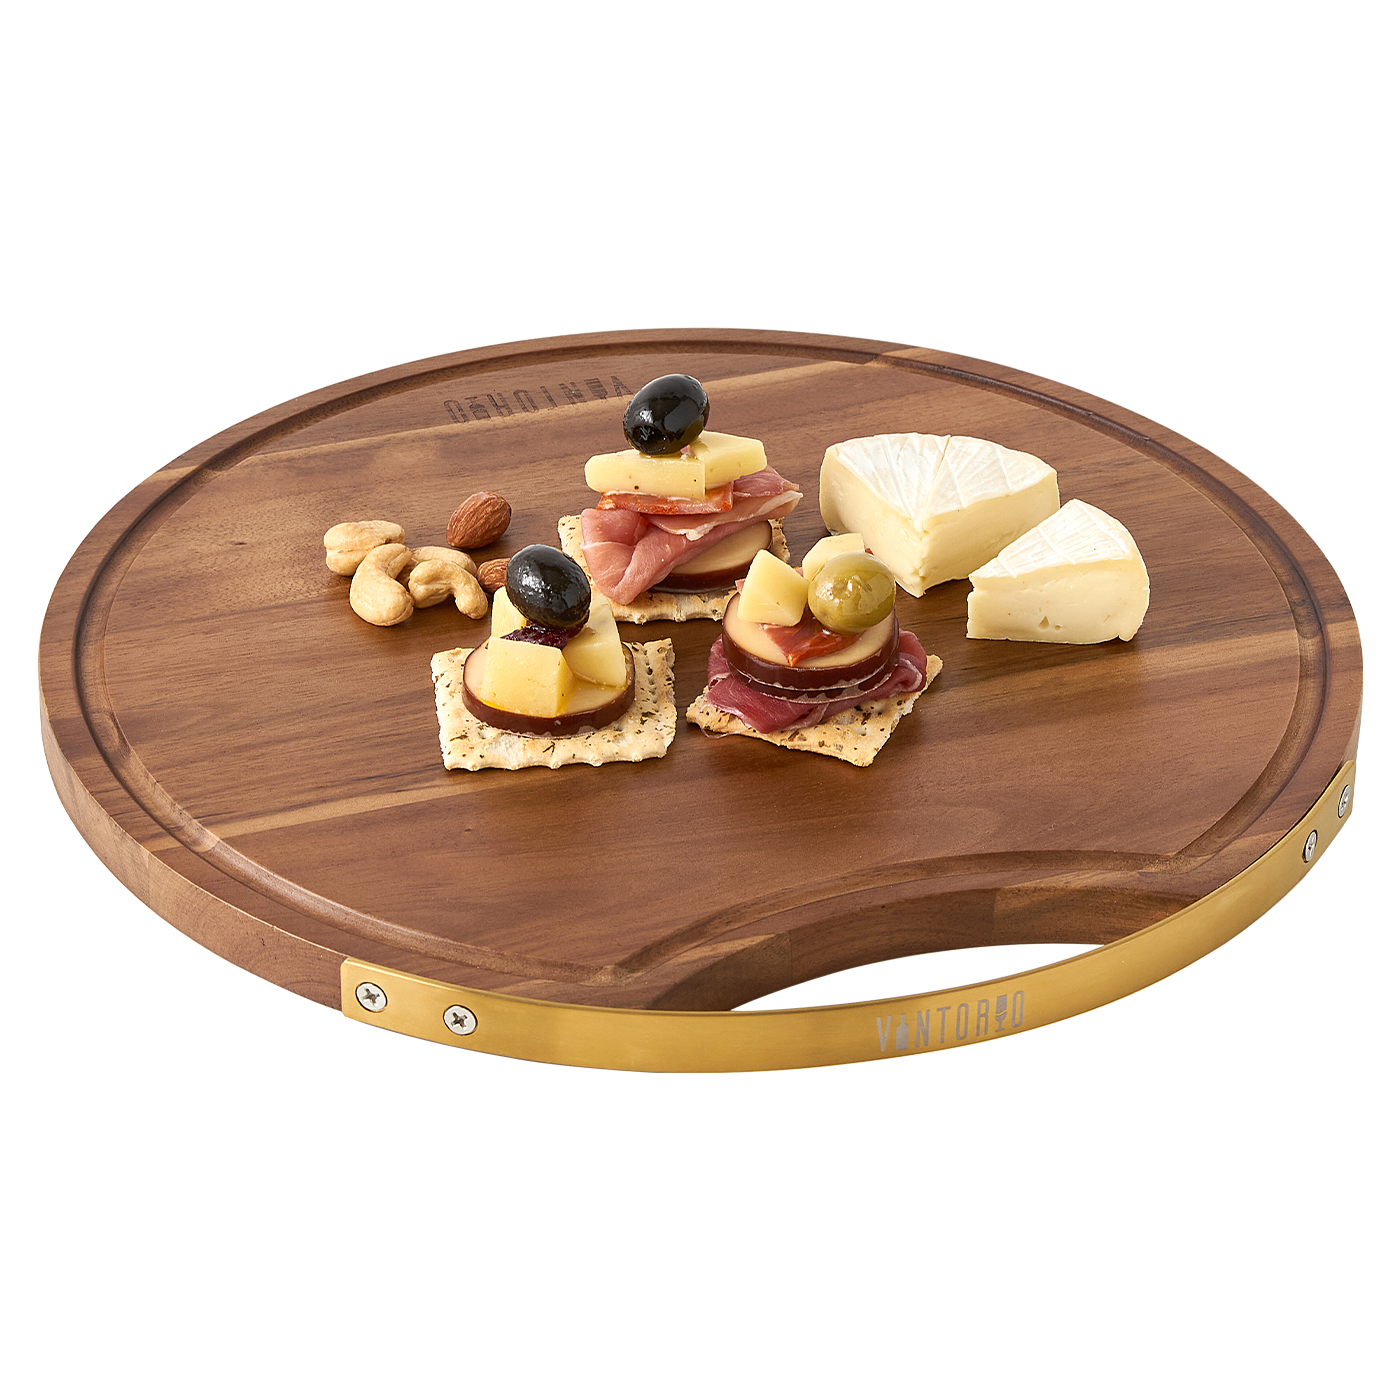 Vintorio Natural Wood Cheese Board with Snacks and Cheese